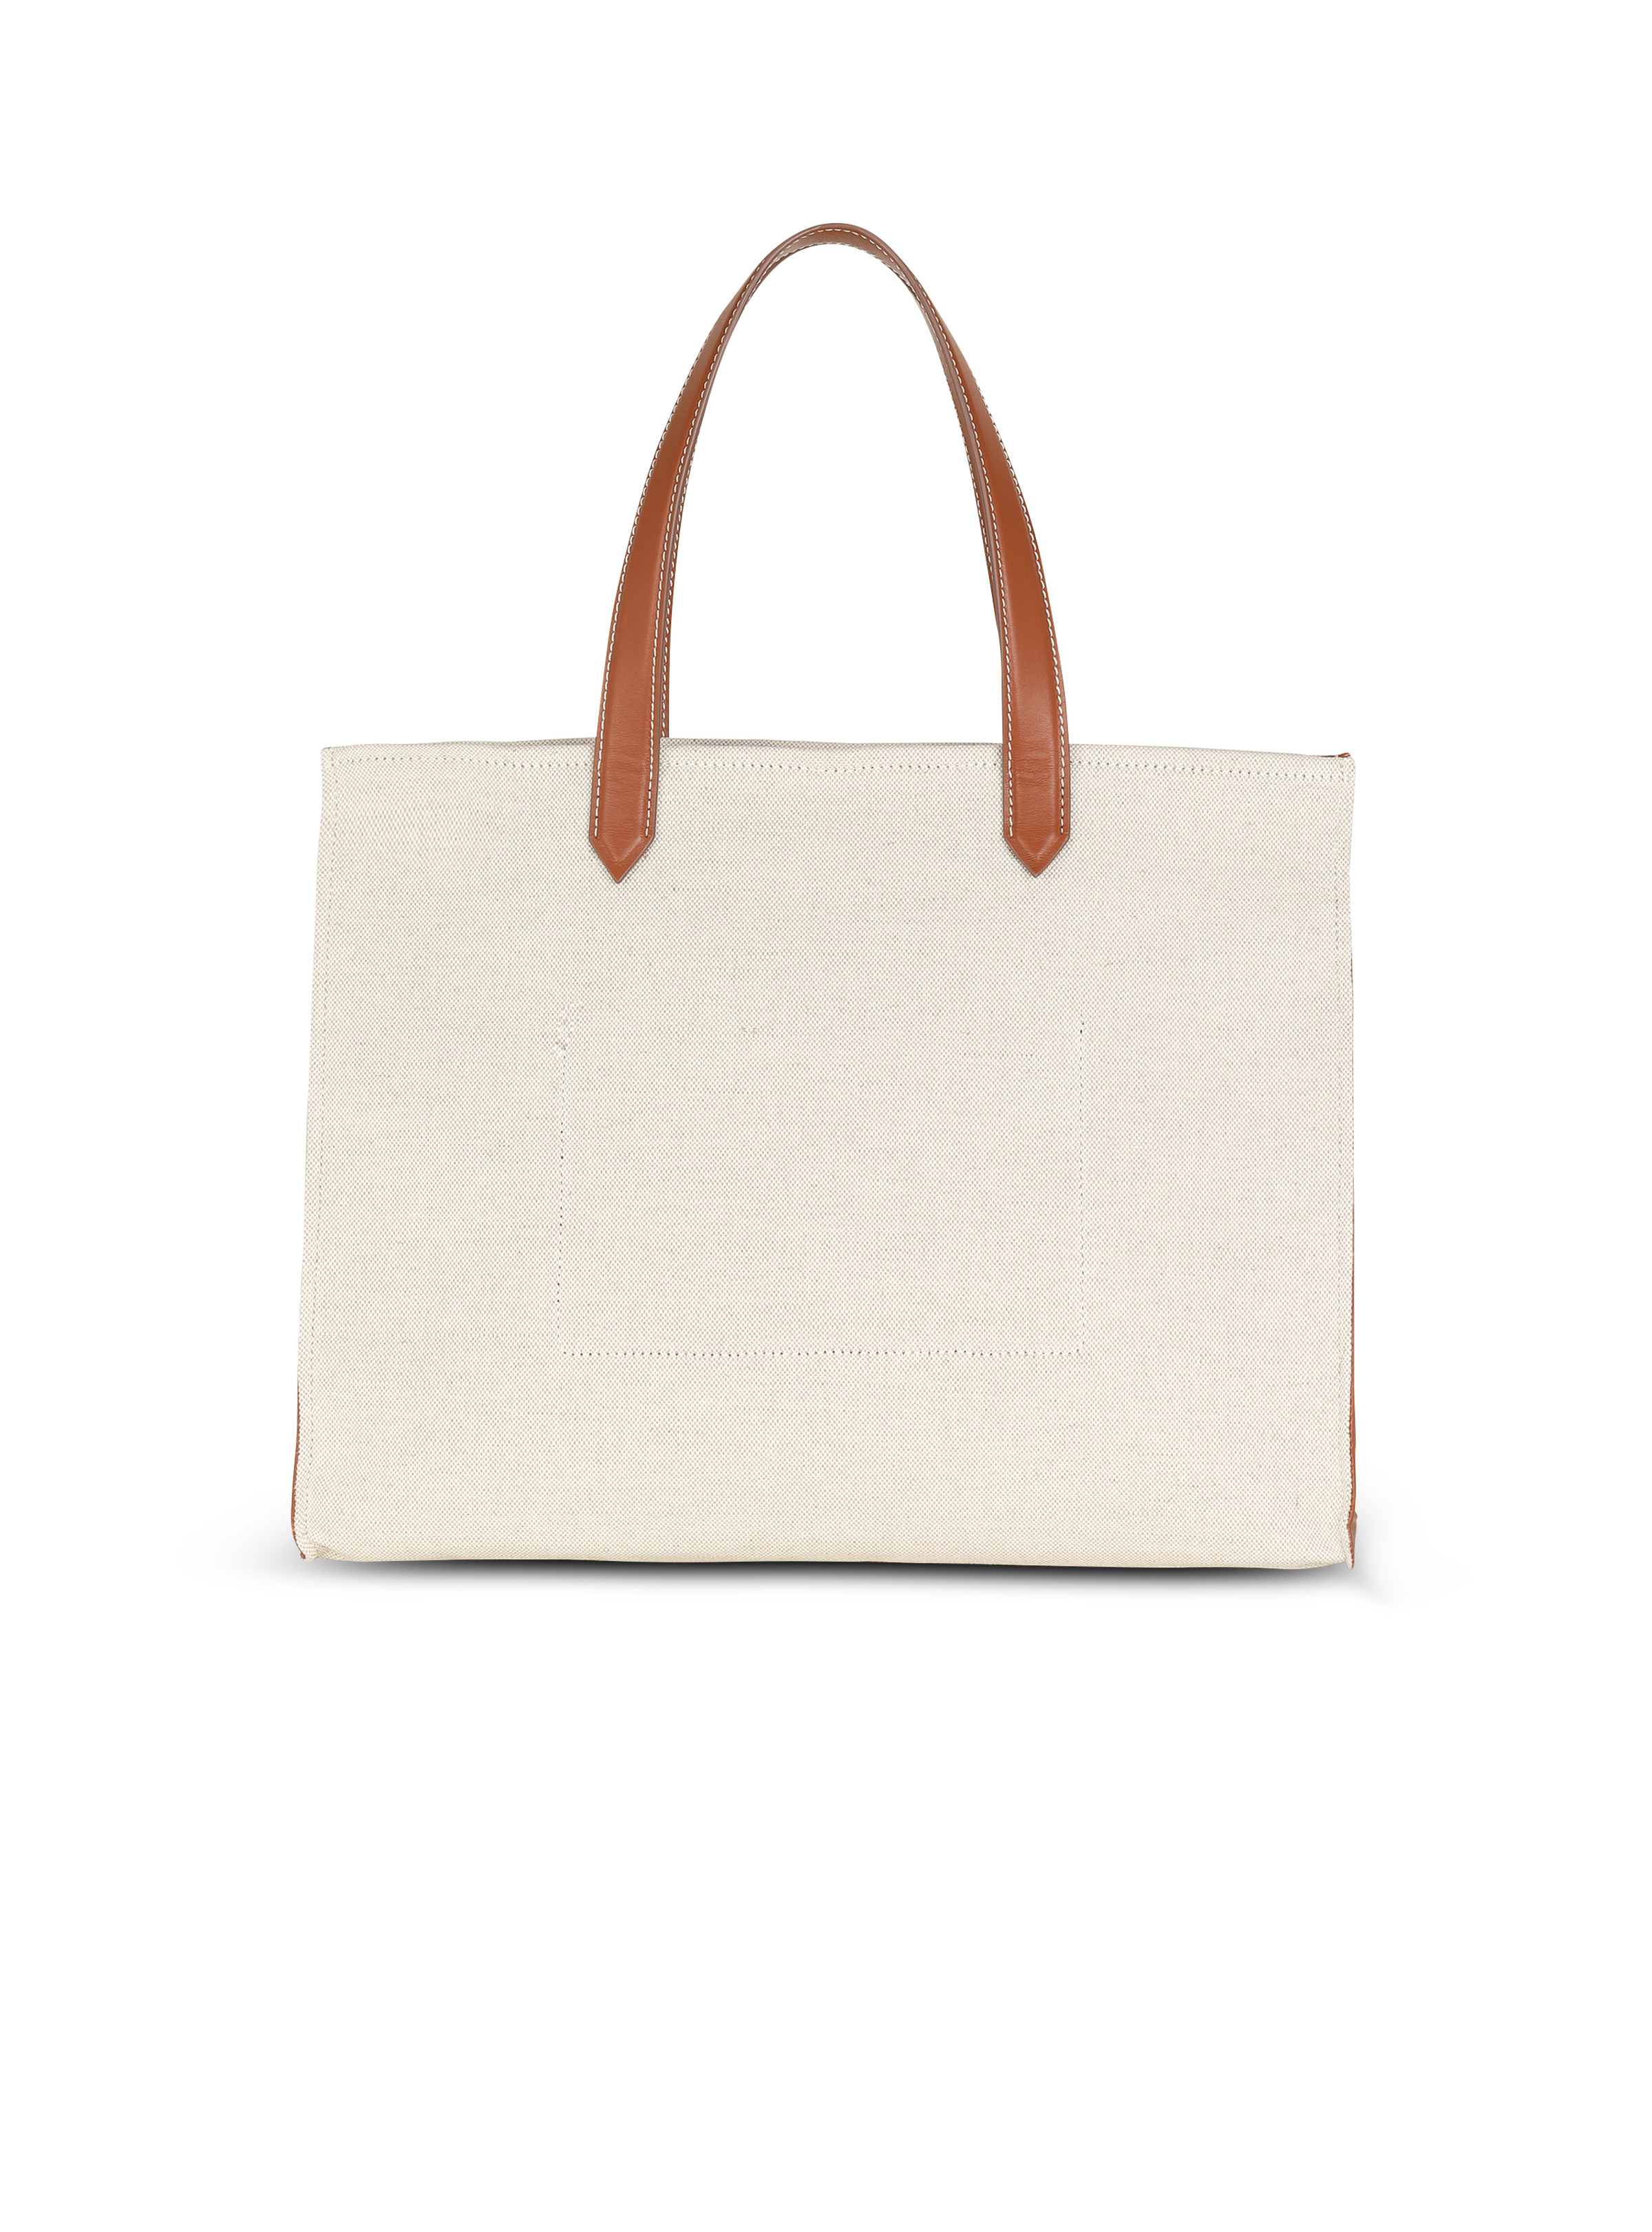 B-Army 42 canvas tote bag with leather details - 4